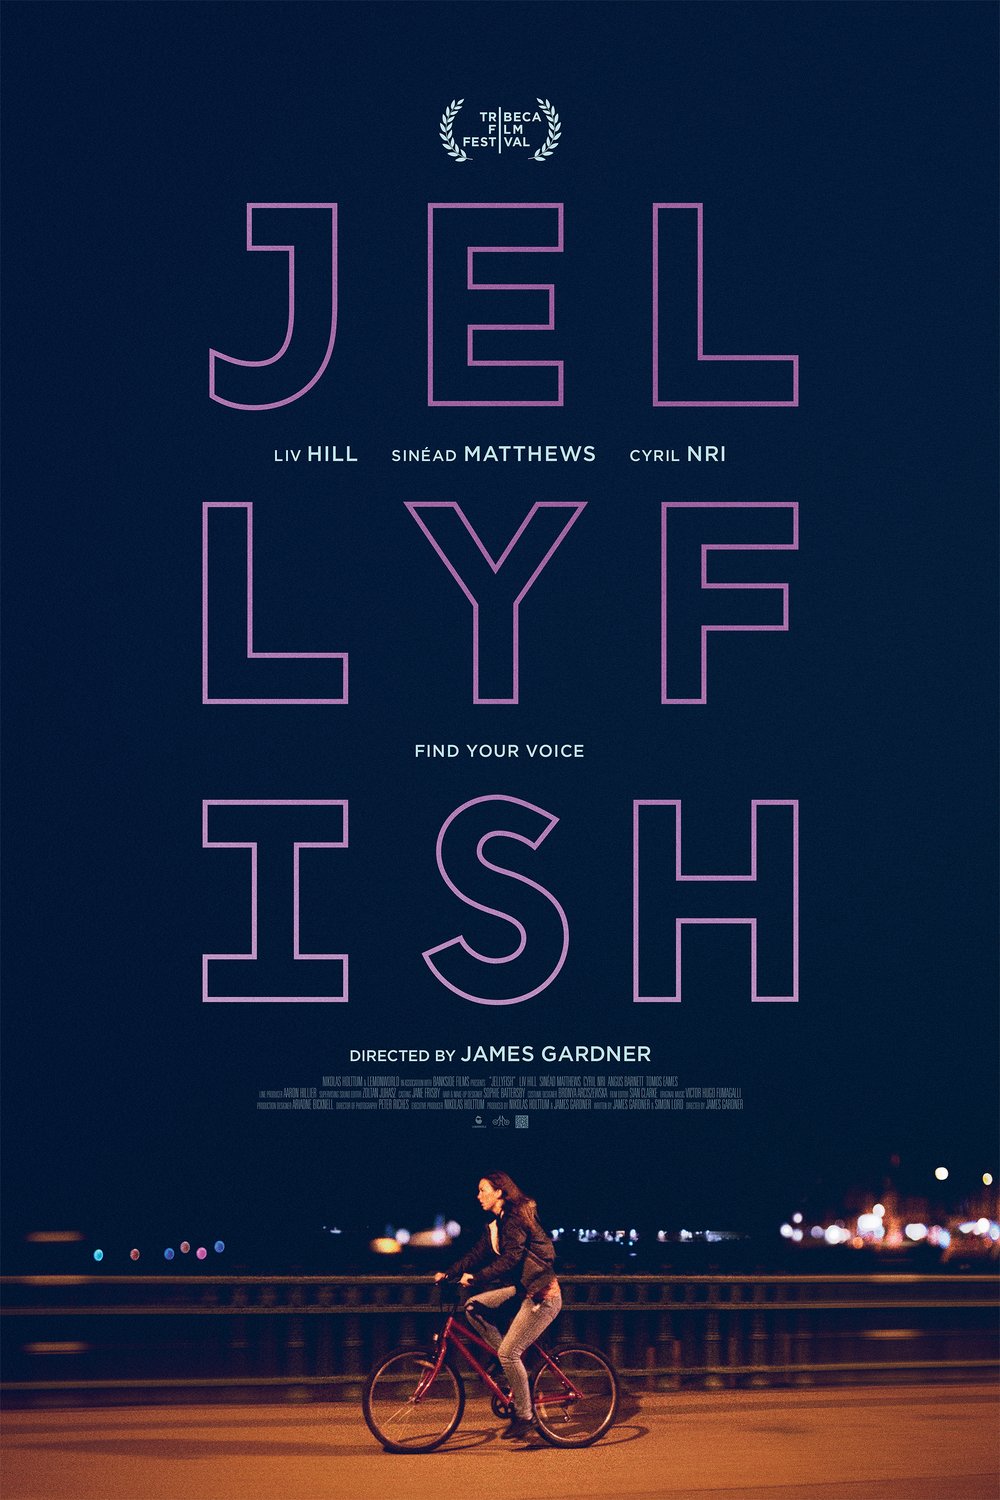 Poster of the movie Jellyfish